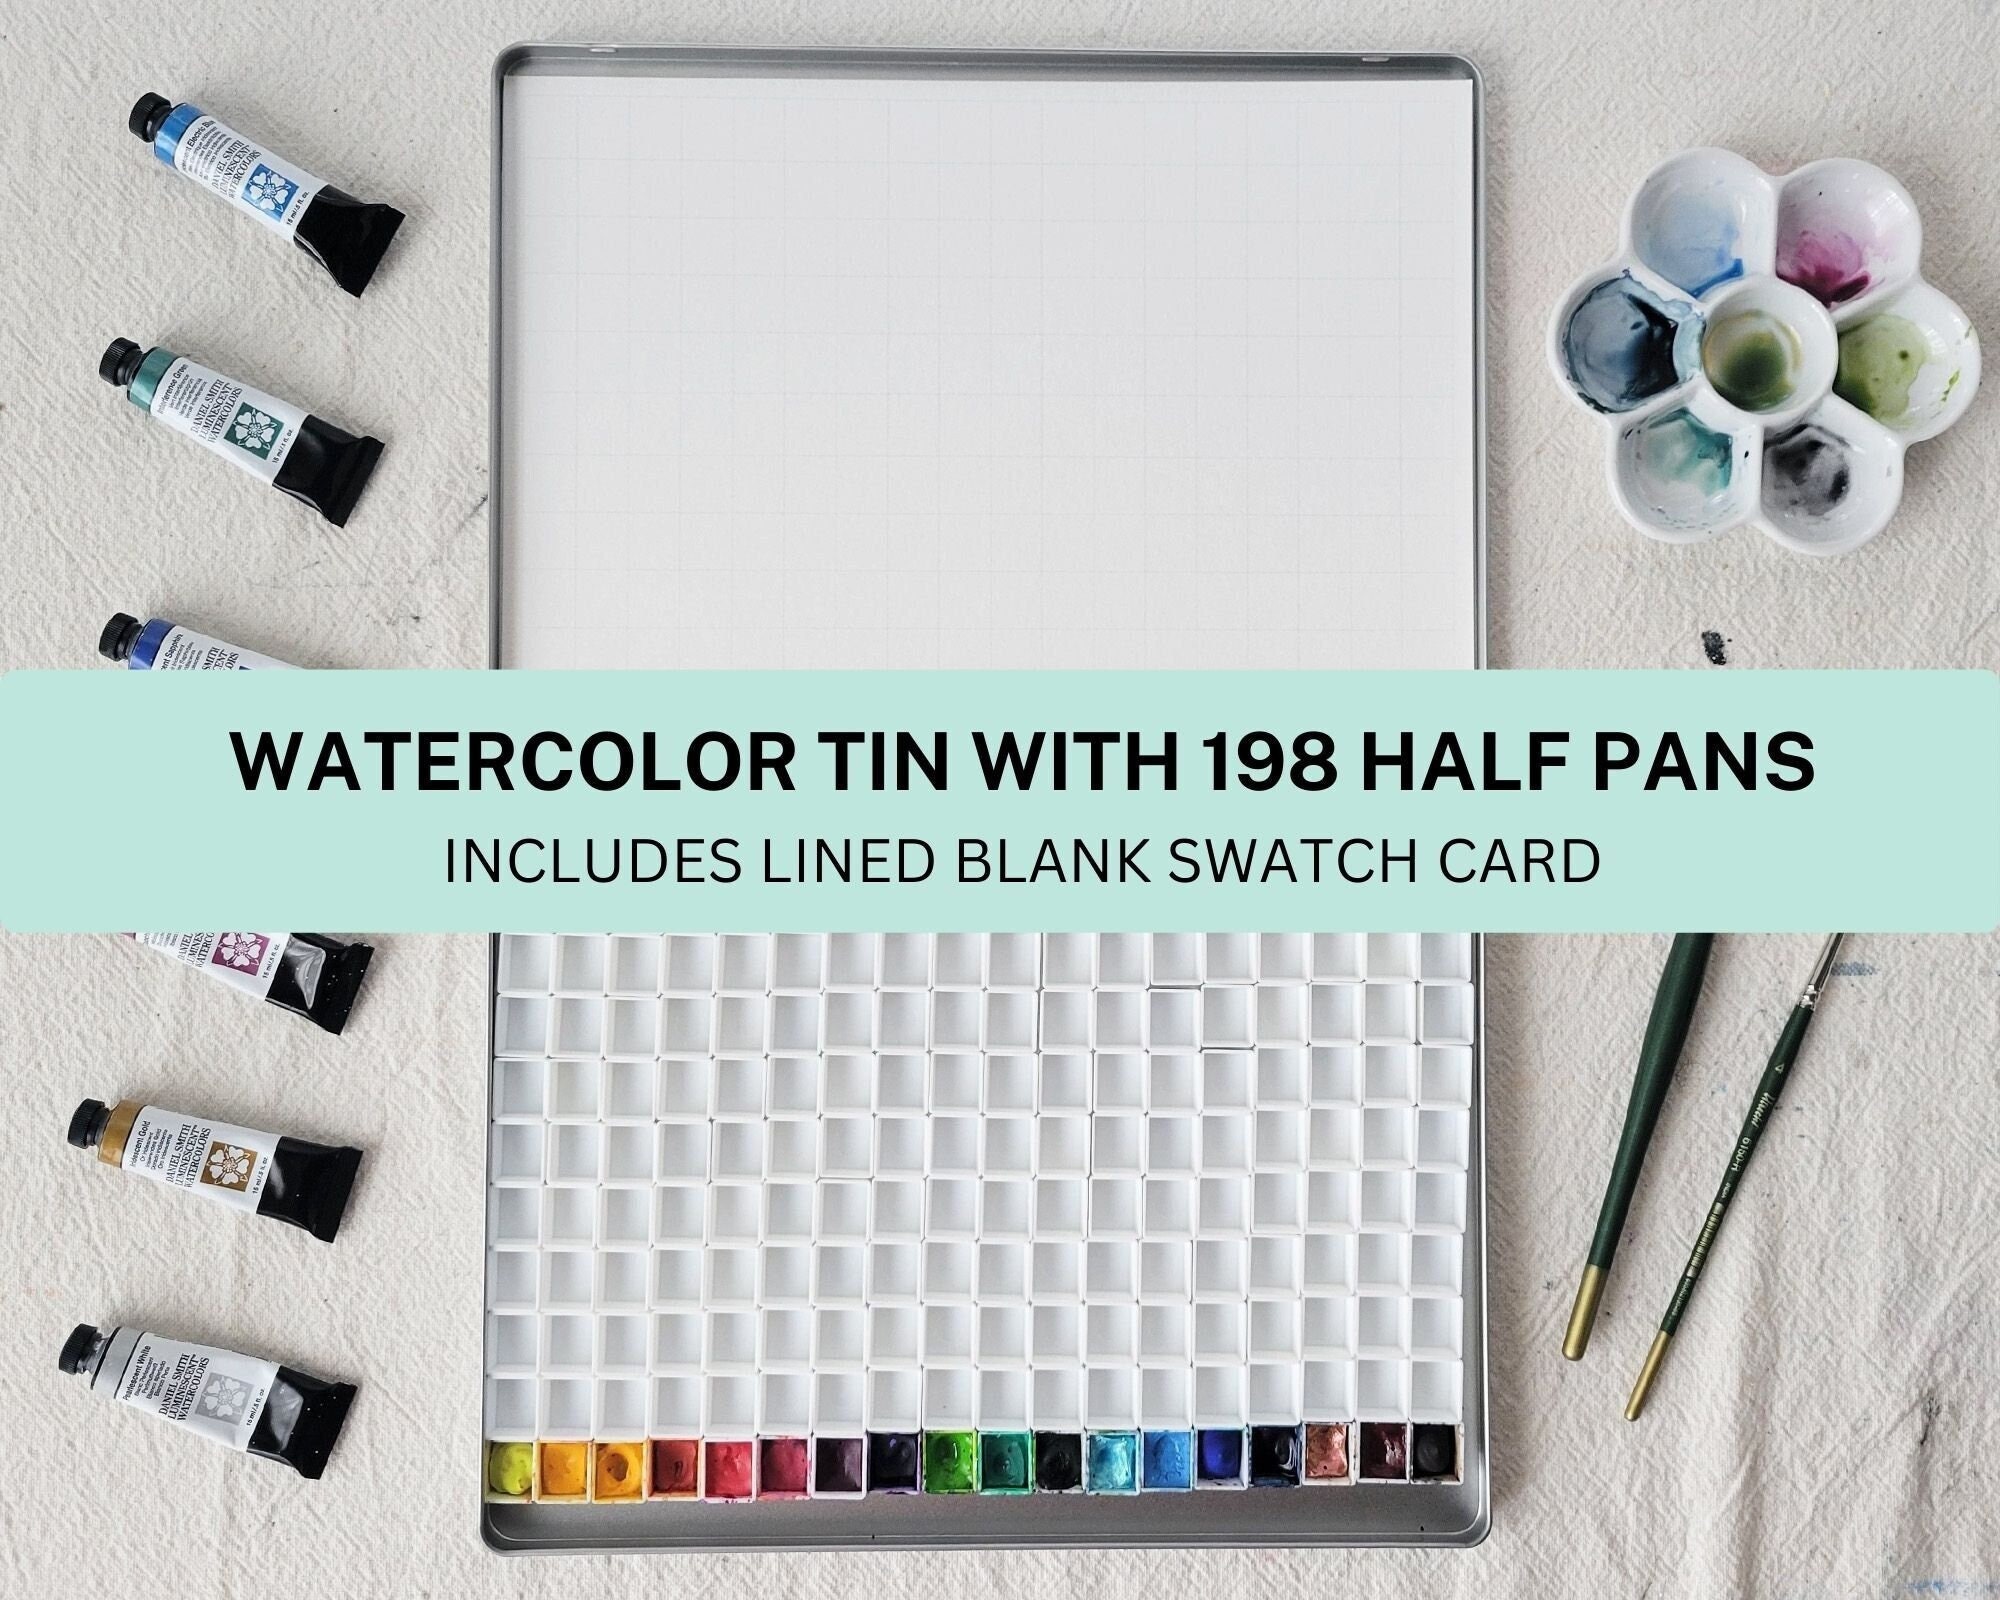 Buy in BULK packs of 50 or 100 Watercolor Paint Pans High Grade Plastic in  Half and Whole Sizes (NOT made in China)